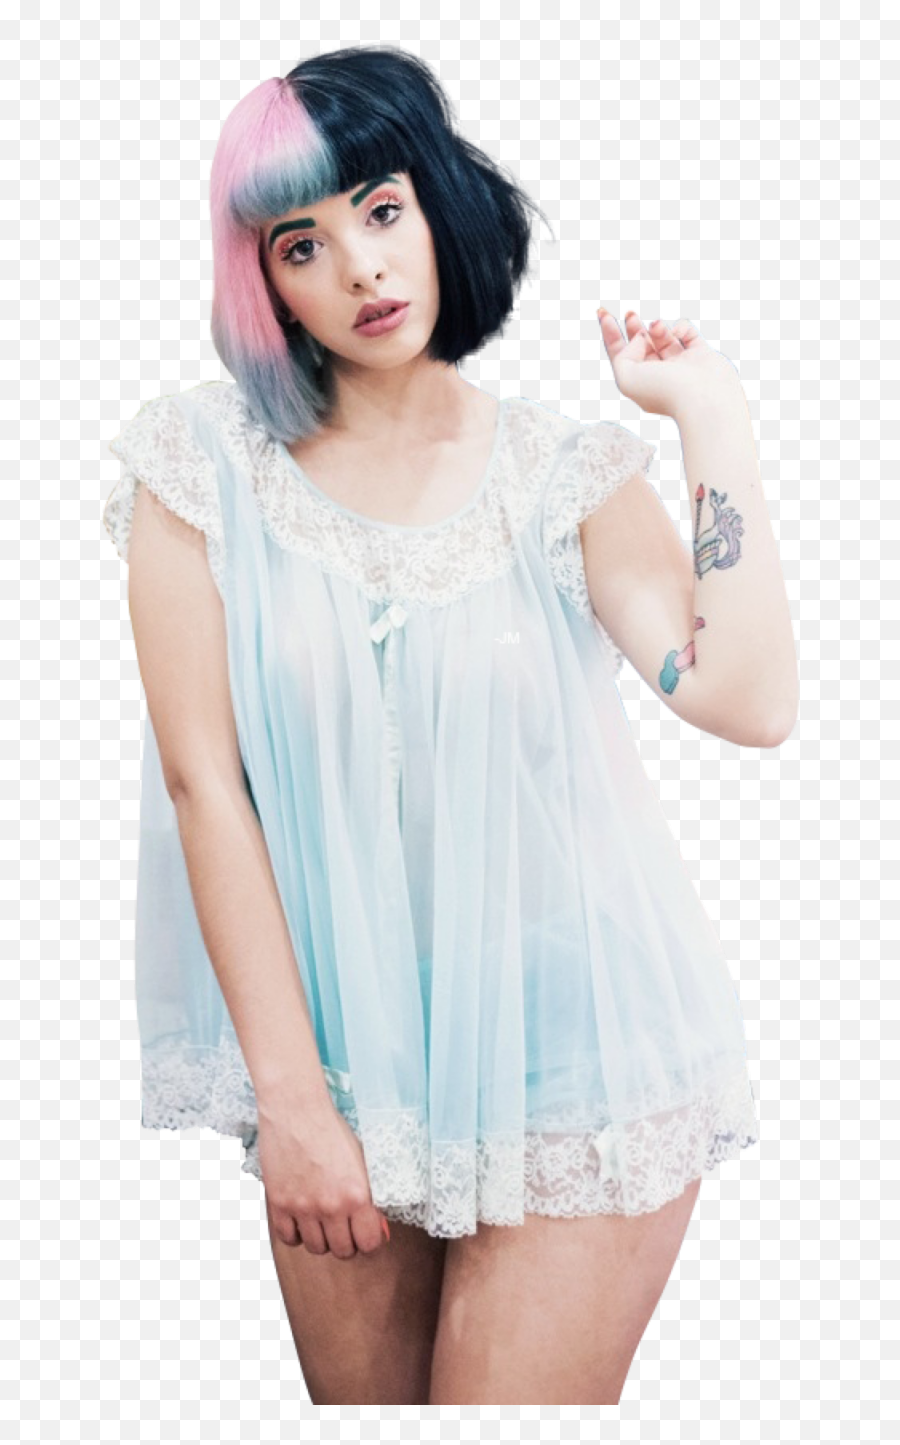 Download Free Png Melanie Martinez - Png Clipart Melanie Martinez Transparent Png,Melanie Martinez Png